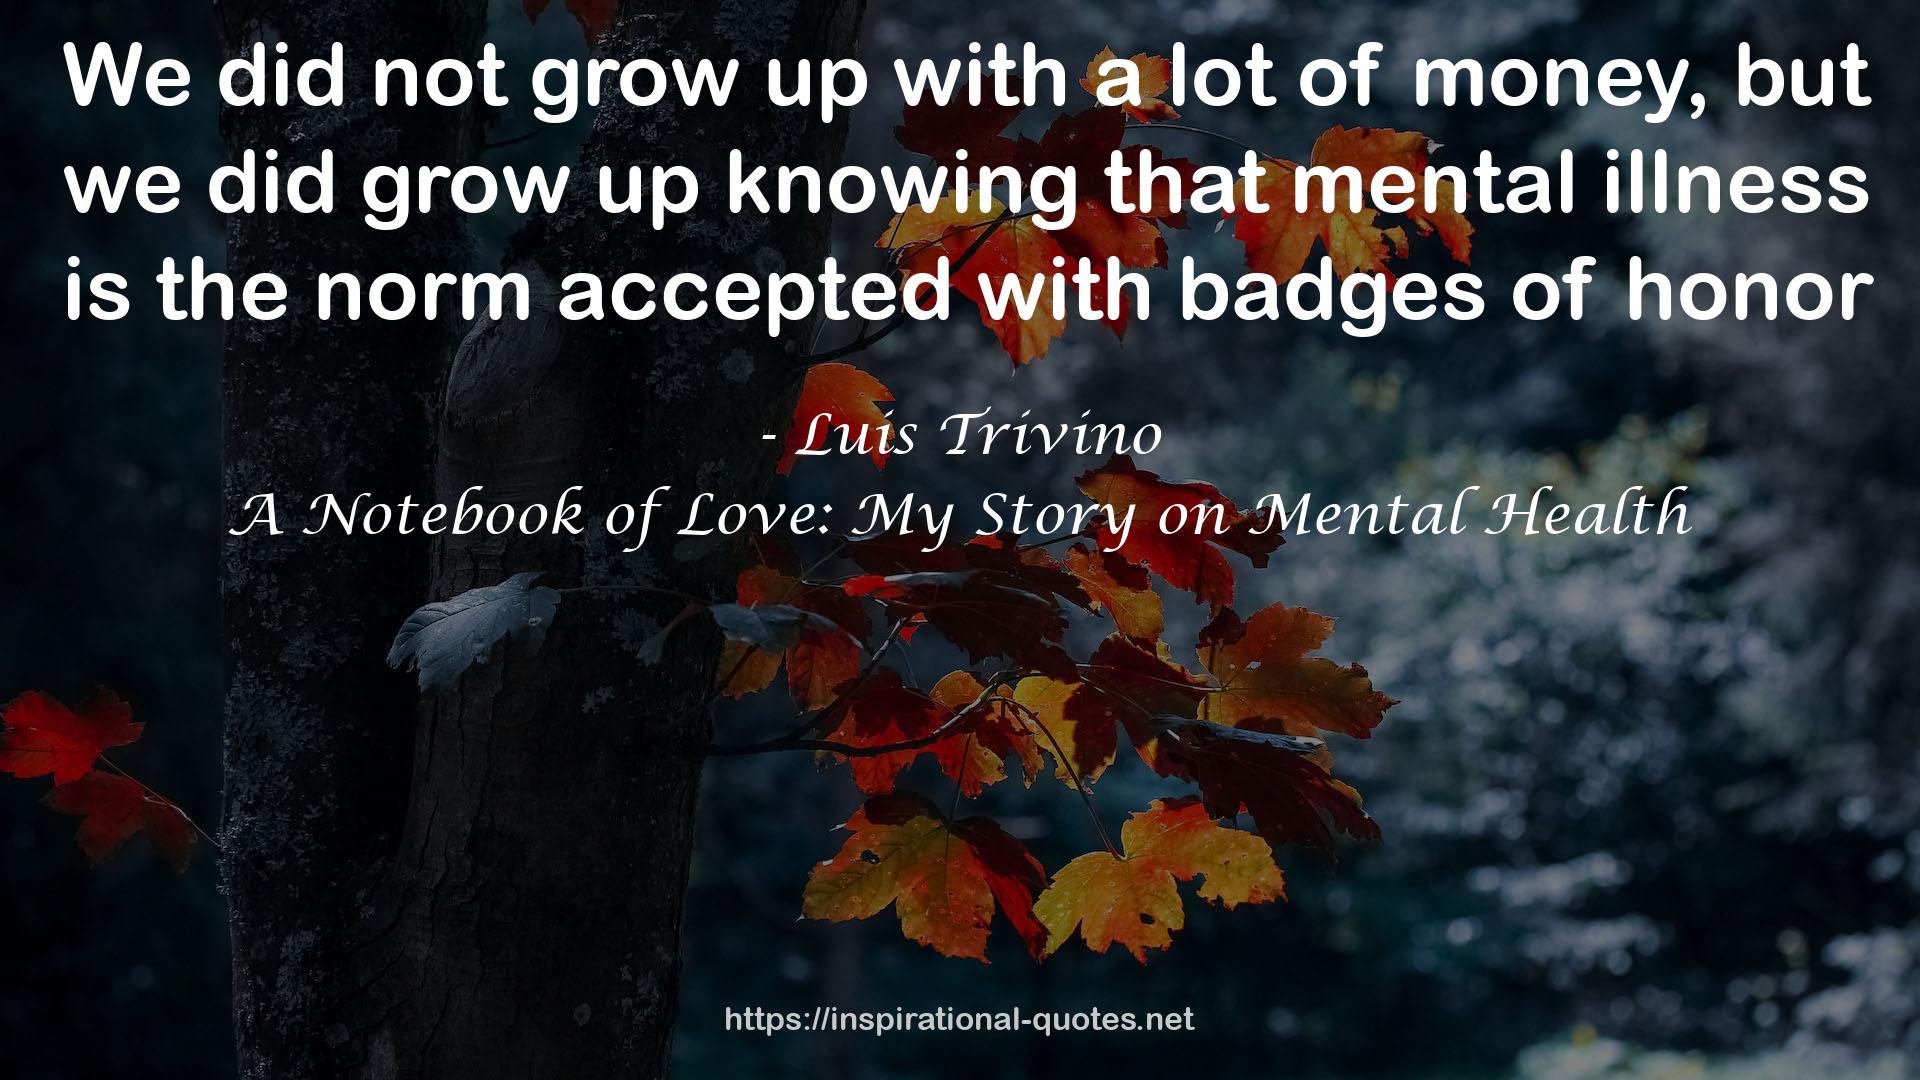 A Notebook of Love: My Story on Mental Health QUOTES